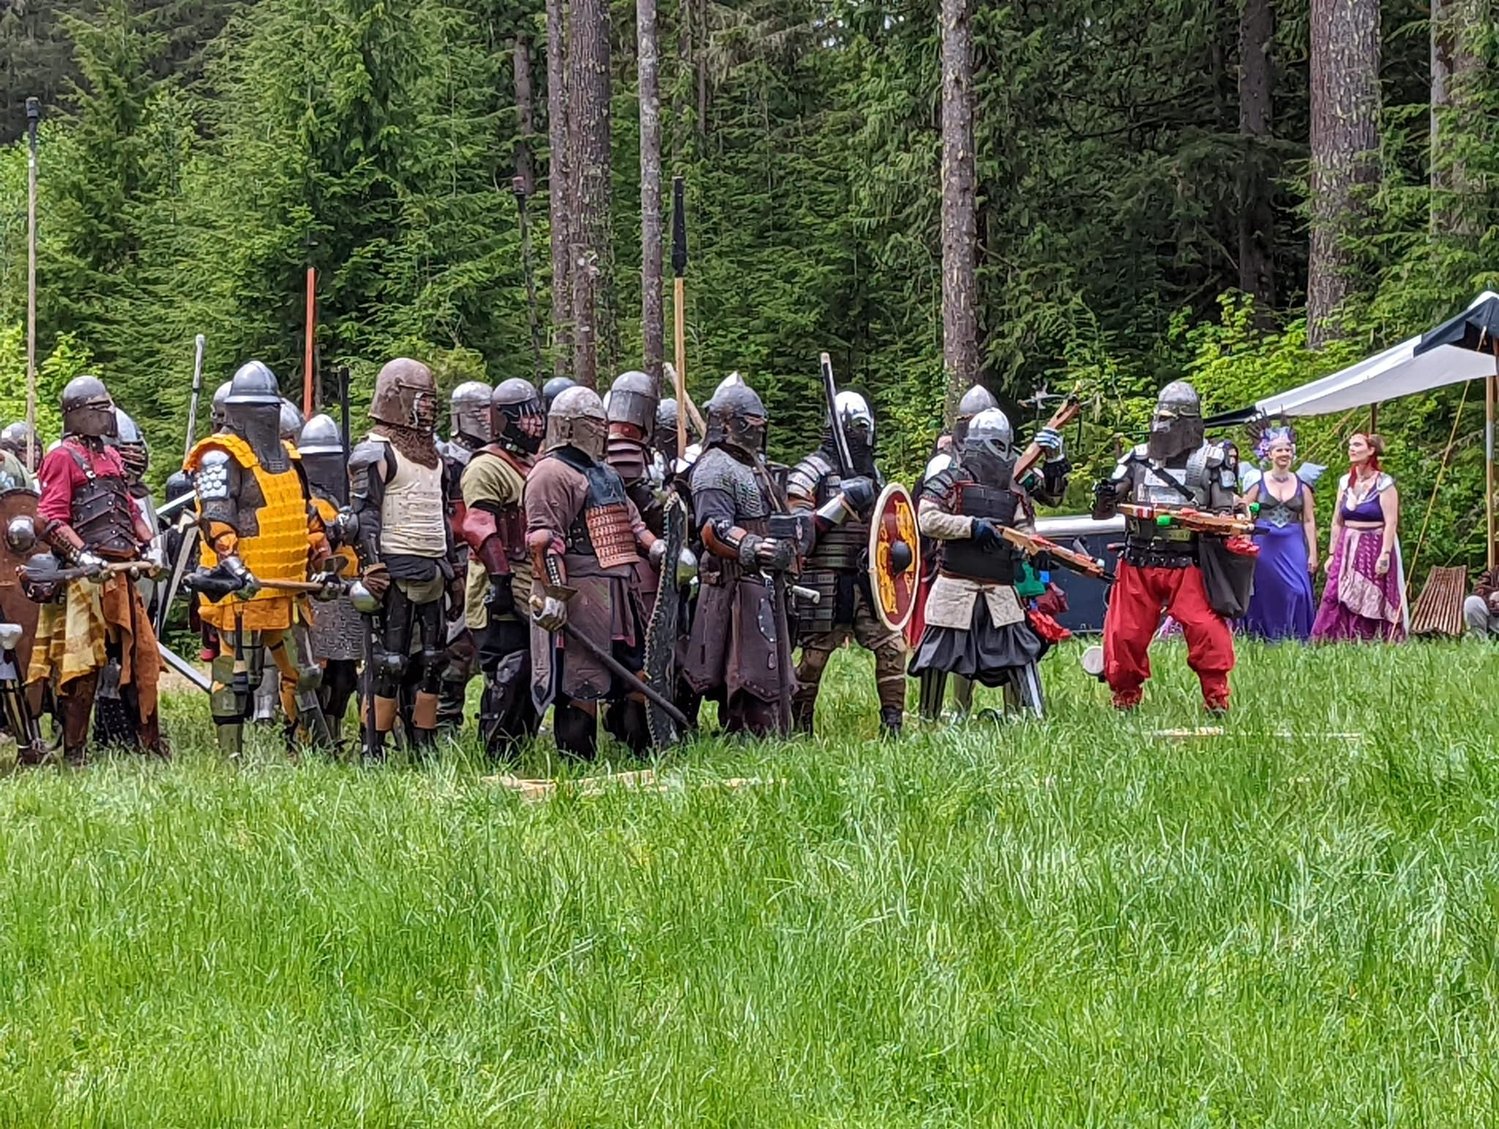 As a prelude to the Norsewest Viking Festival, the Ring of Fire event will be held on a Fourth of July celebration held in Yelm.